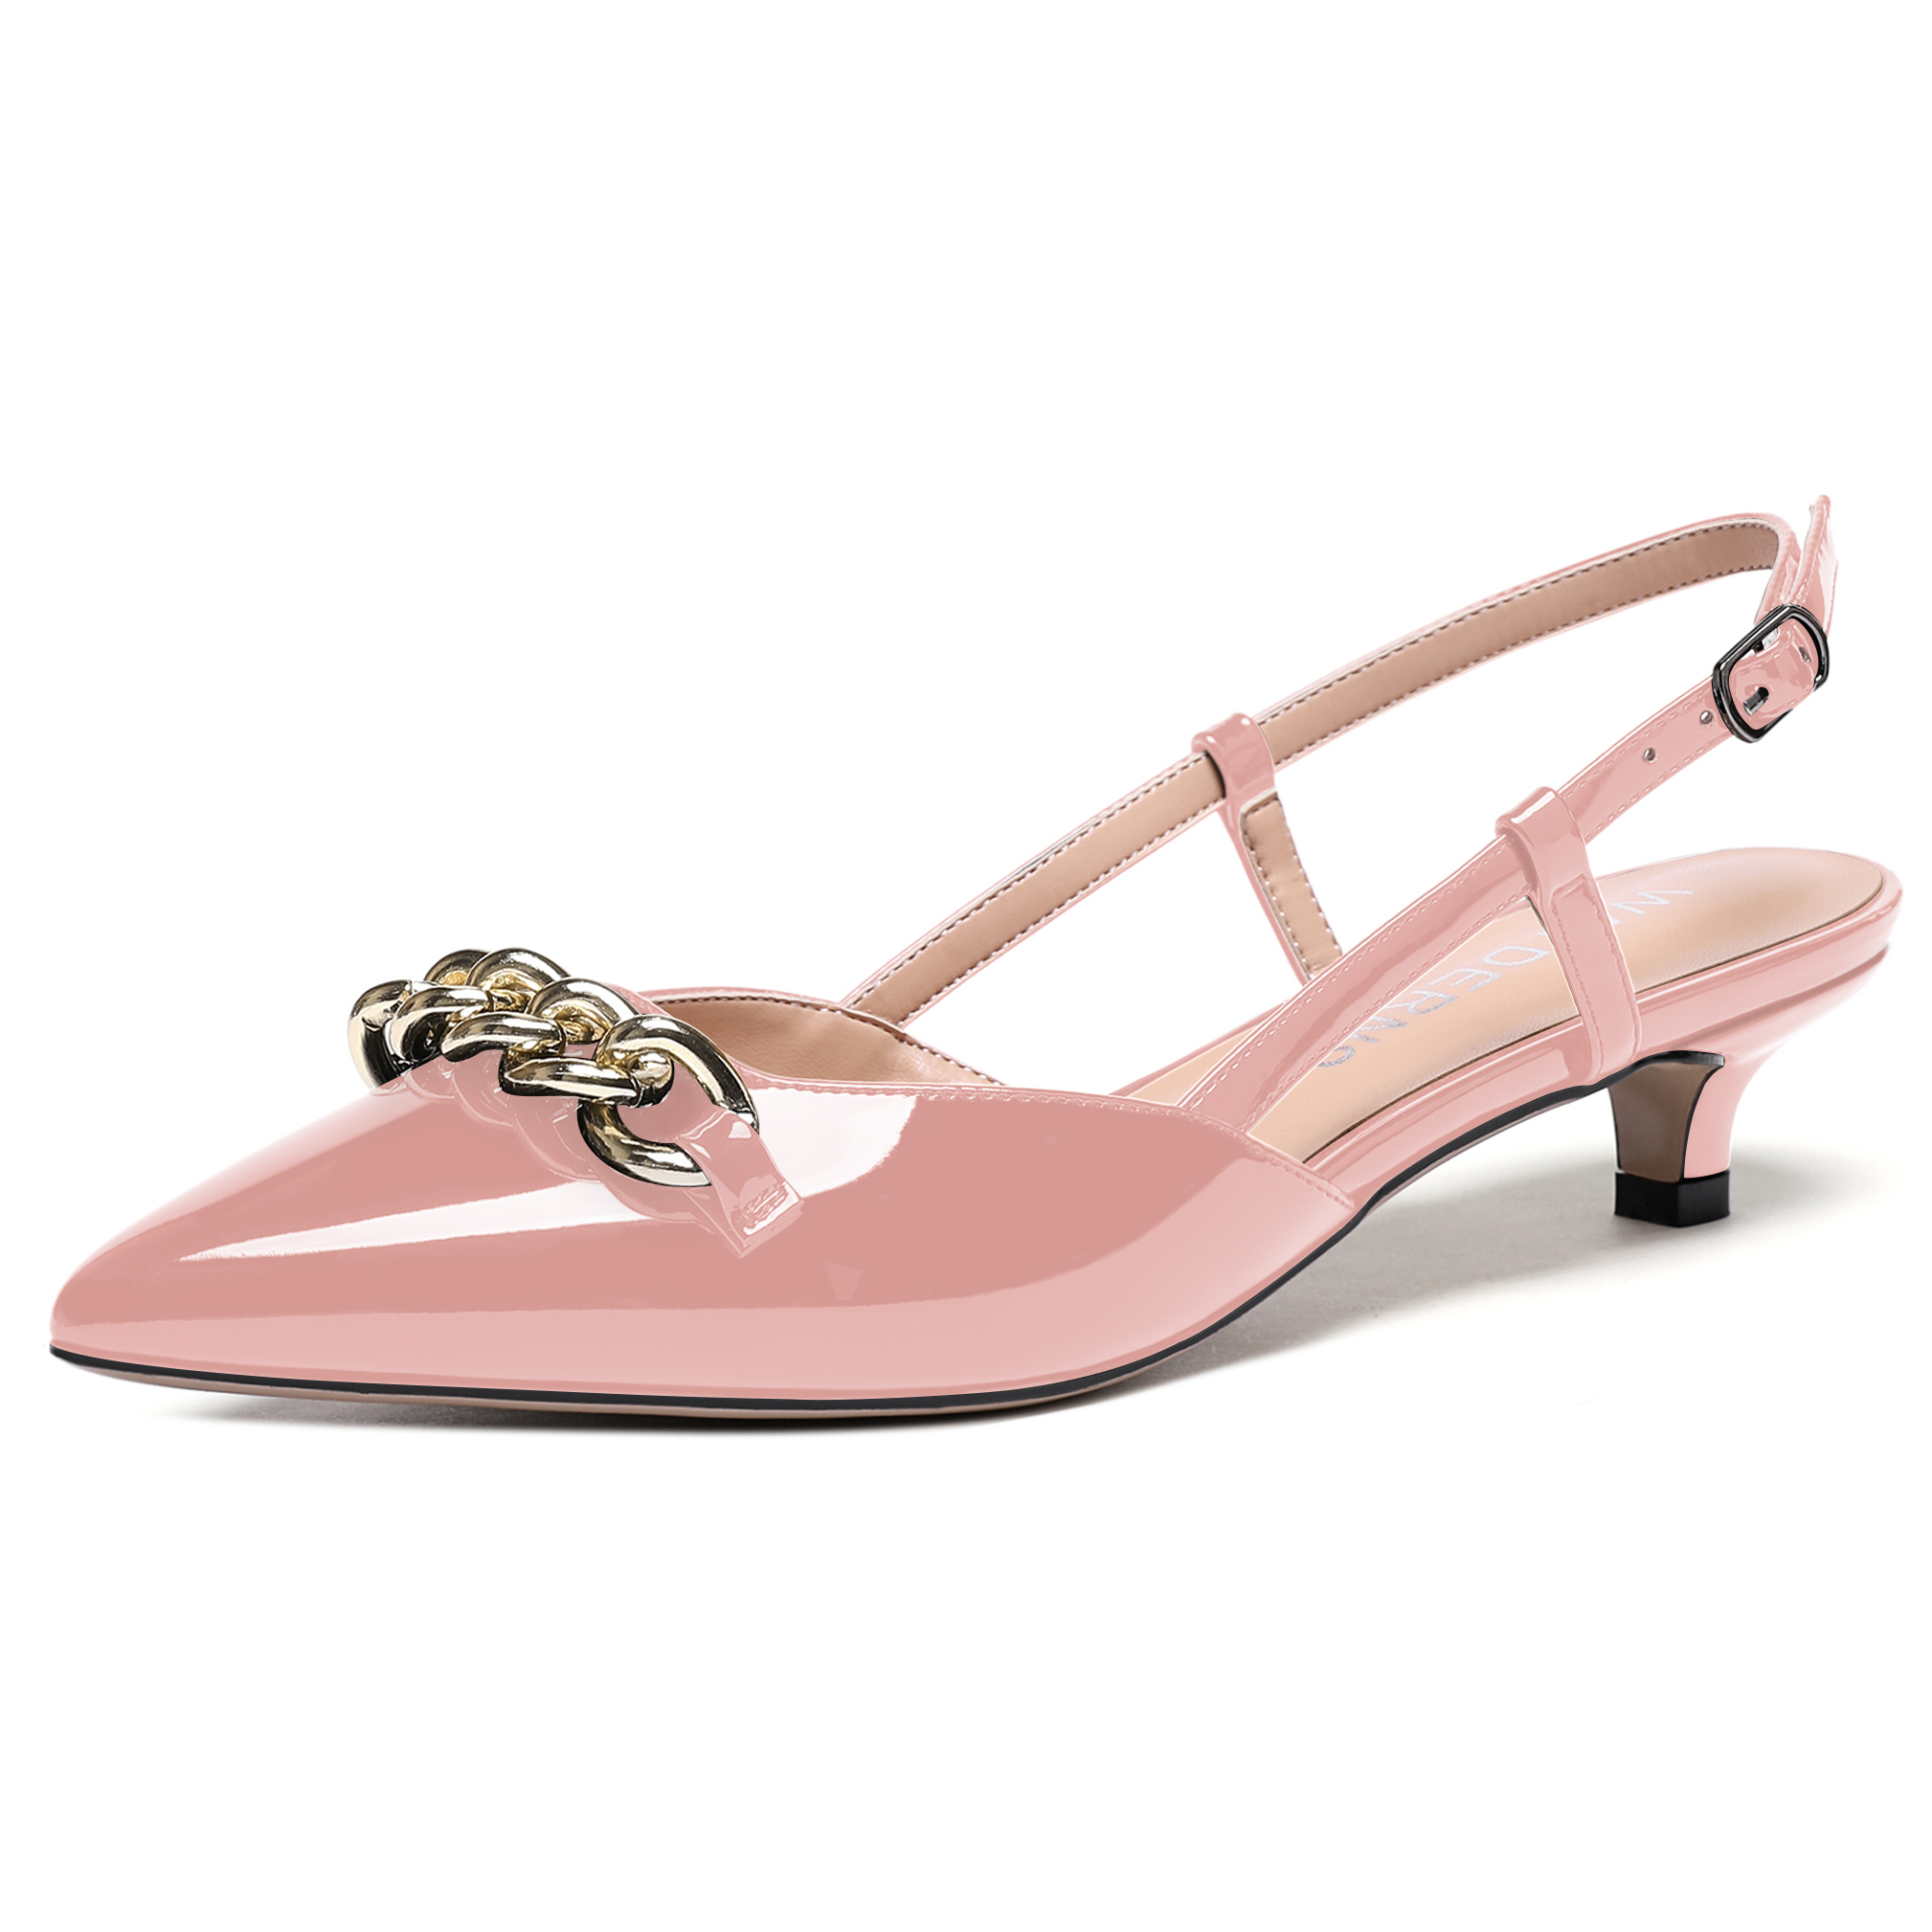 Avaleigh Slingback Kitten Low Heels With Metallic Chain